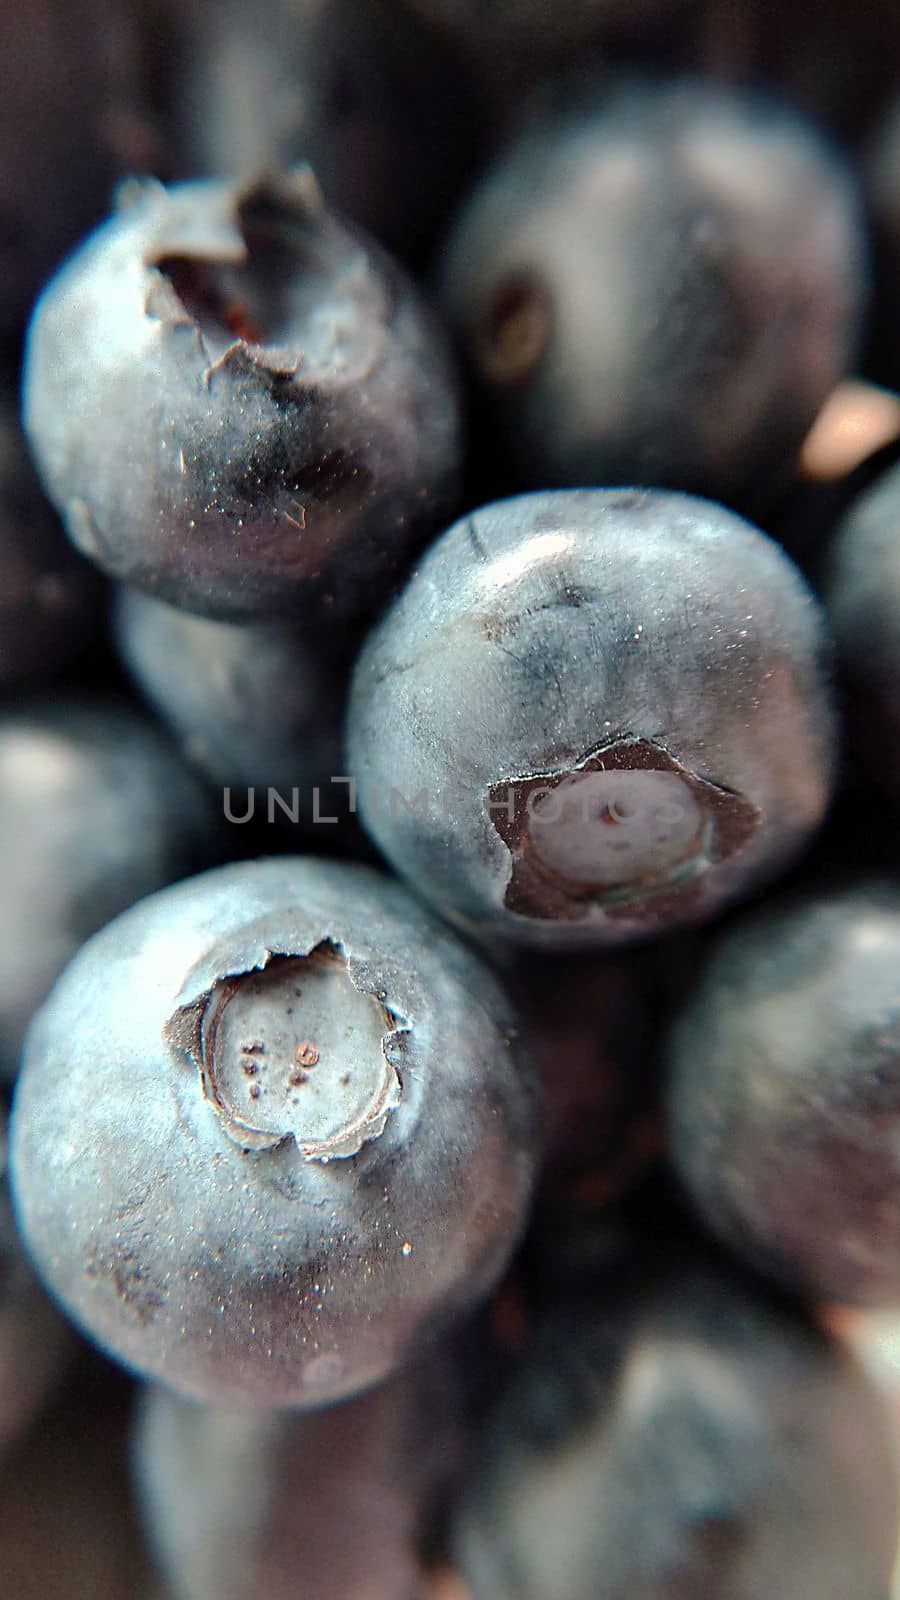 Background texture of garden ripe blueberries close-up by Mastak80